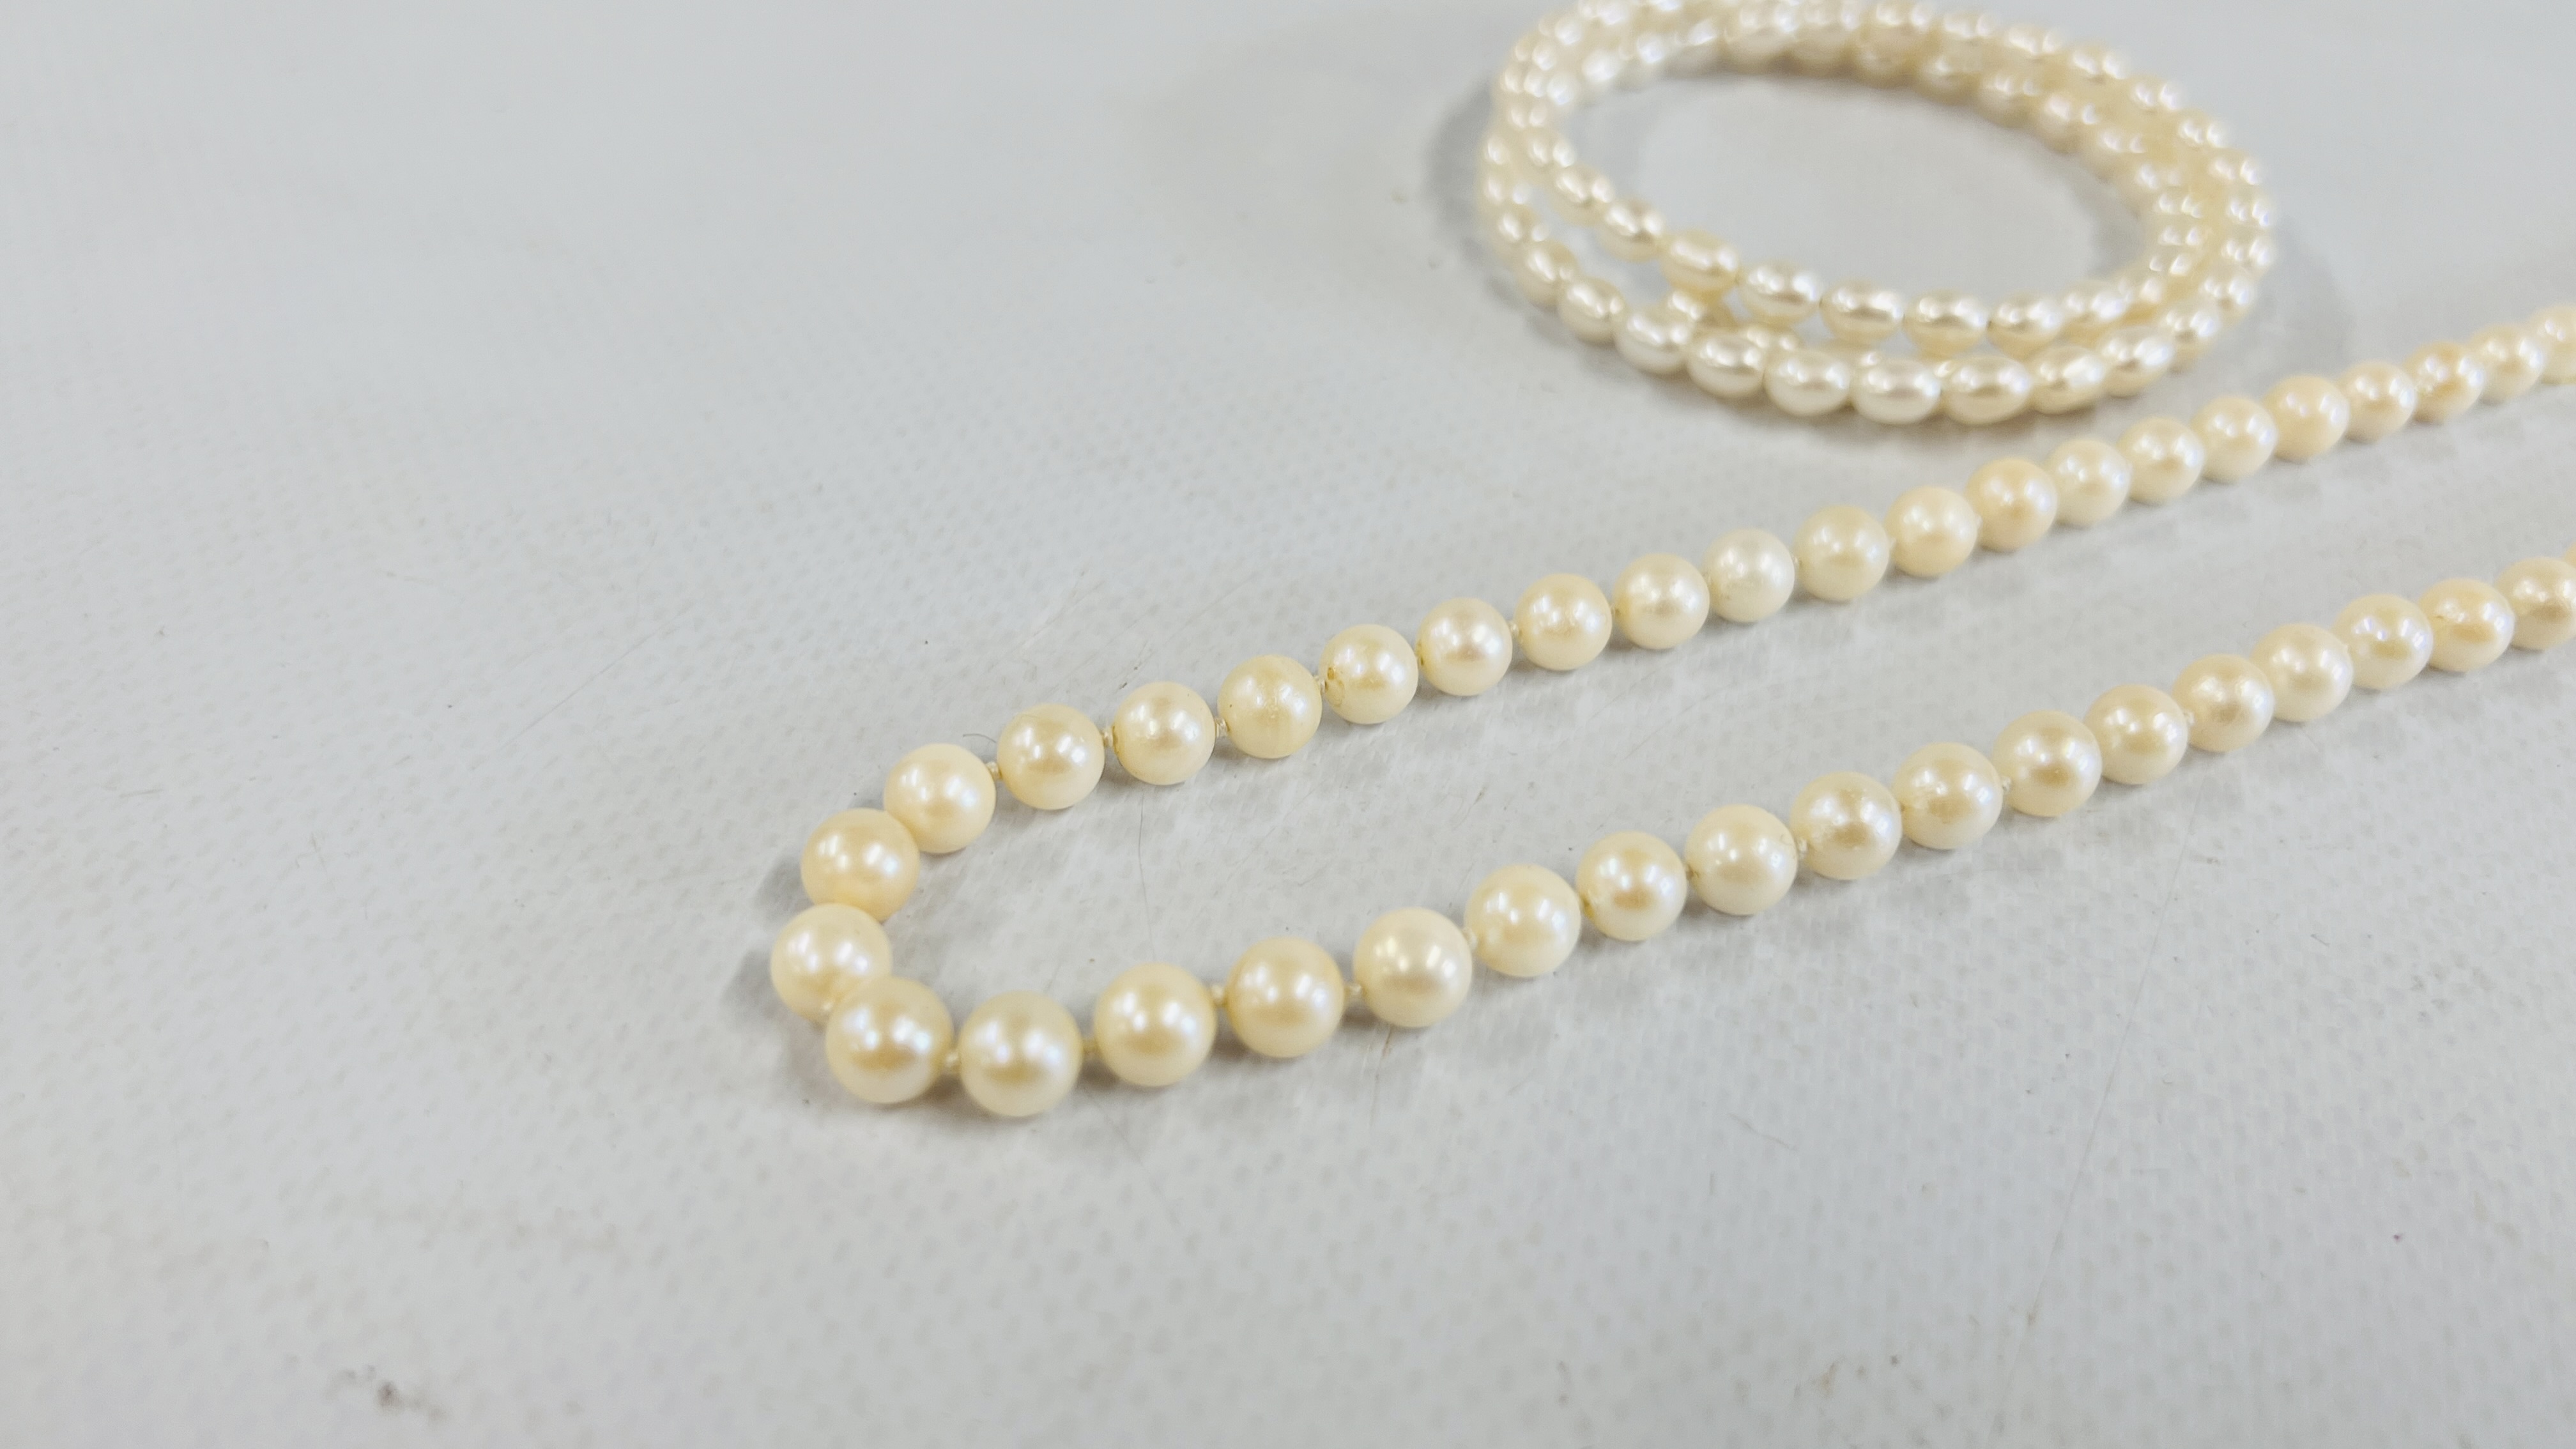 A PEARL STRAND NECKLACE WITH A 9CT GOLD CLASP AND SAFETY CHAIN AlONG WITH A PEARL BRACELET. - Image 5 of 5